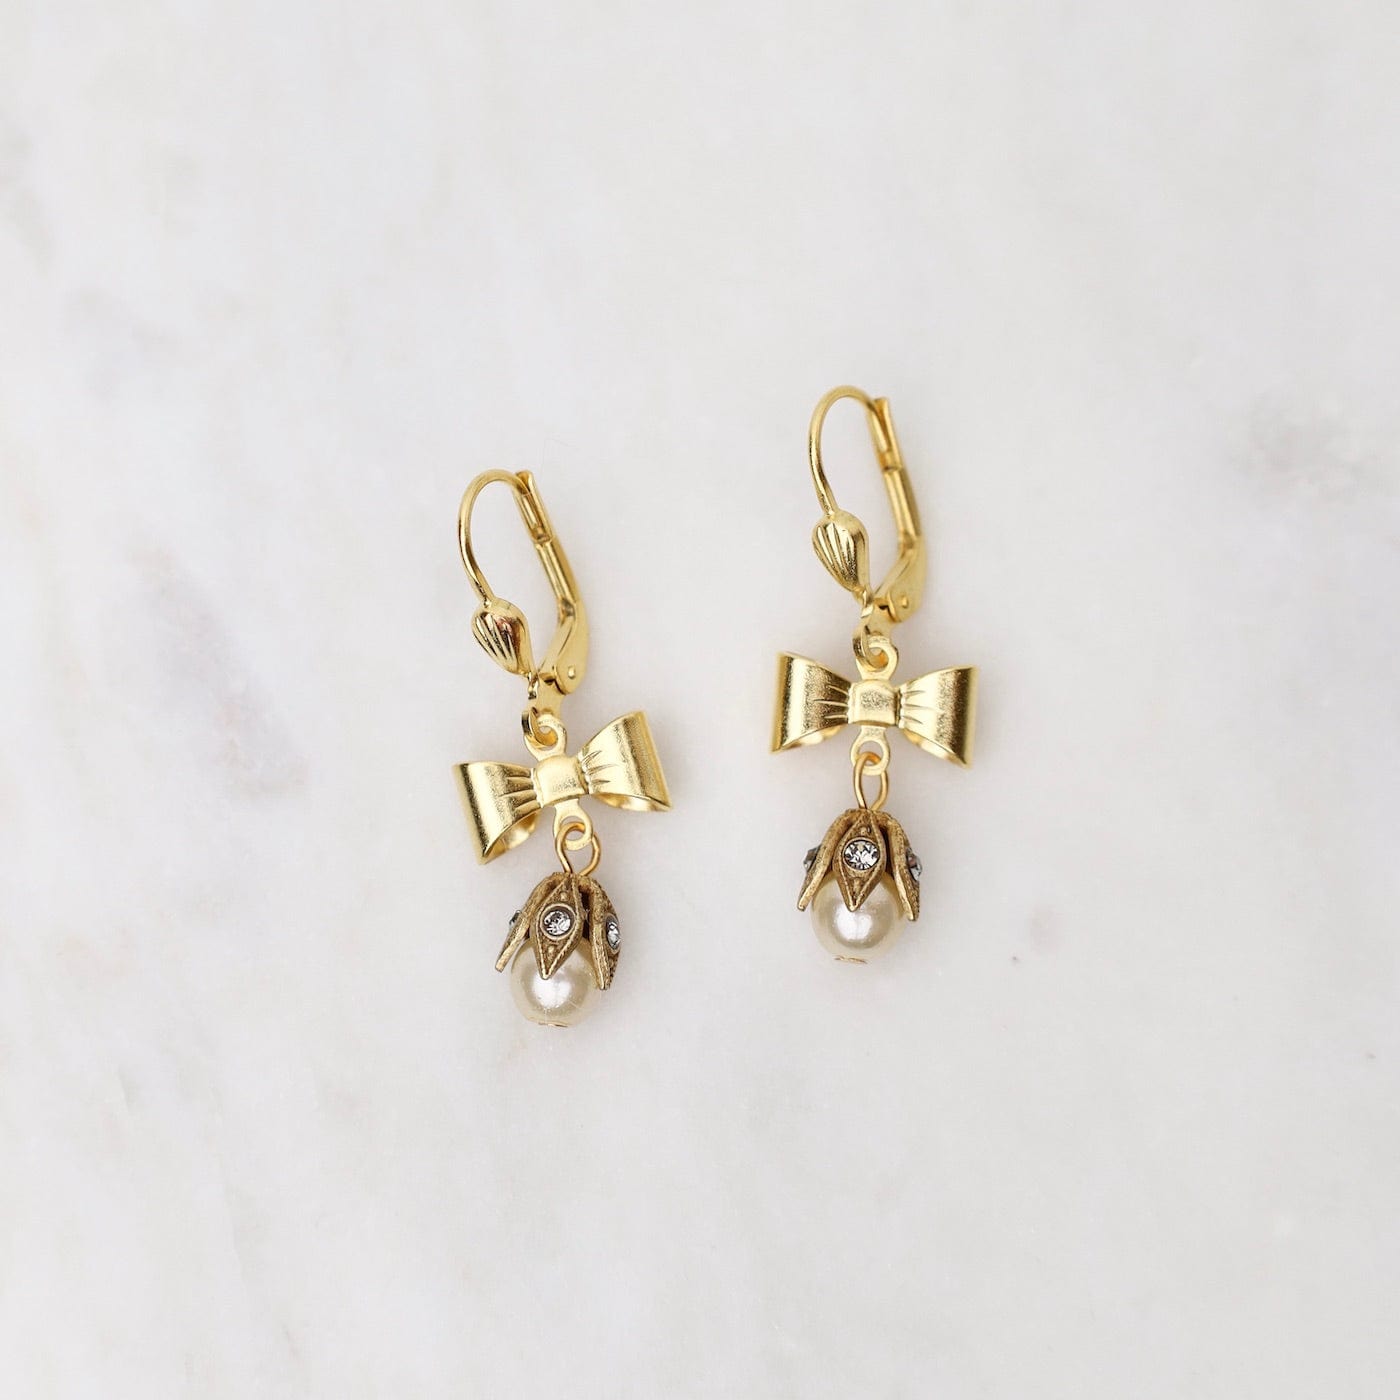 EAR-JM Gold Bow and Pearl Earrings